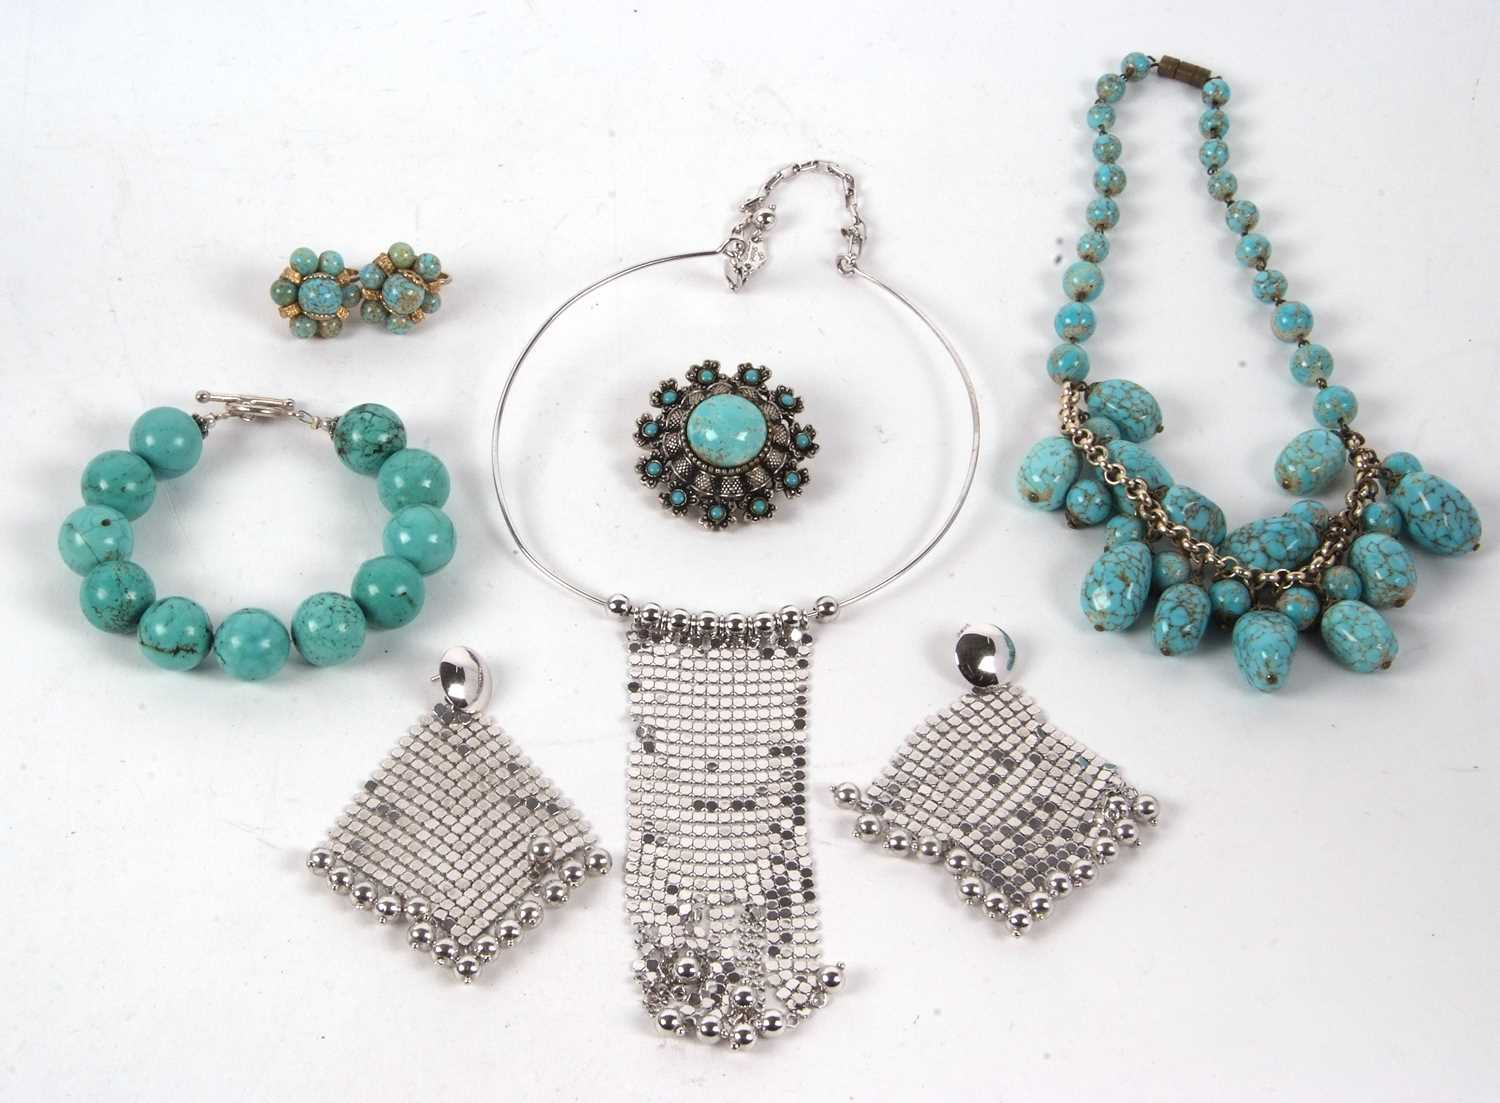 Italian silver necklace and earrings, the torque style necklace with mesh panel pendant, with - Image 2 of 2